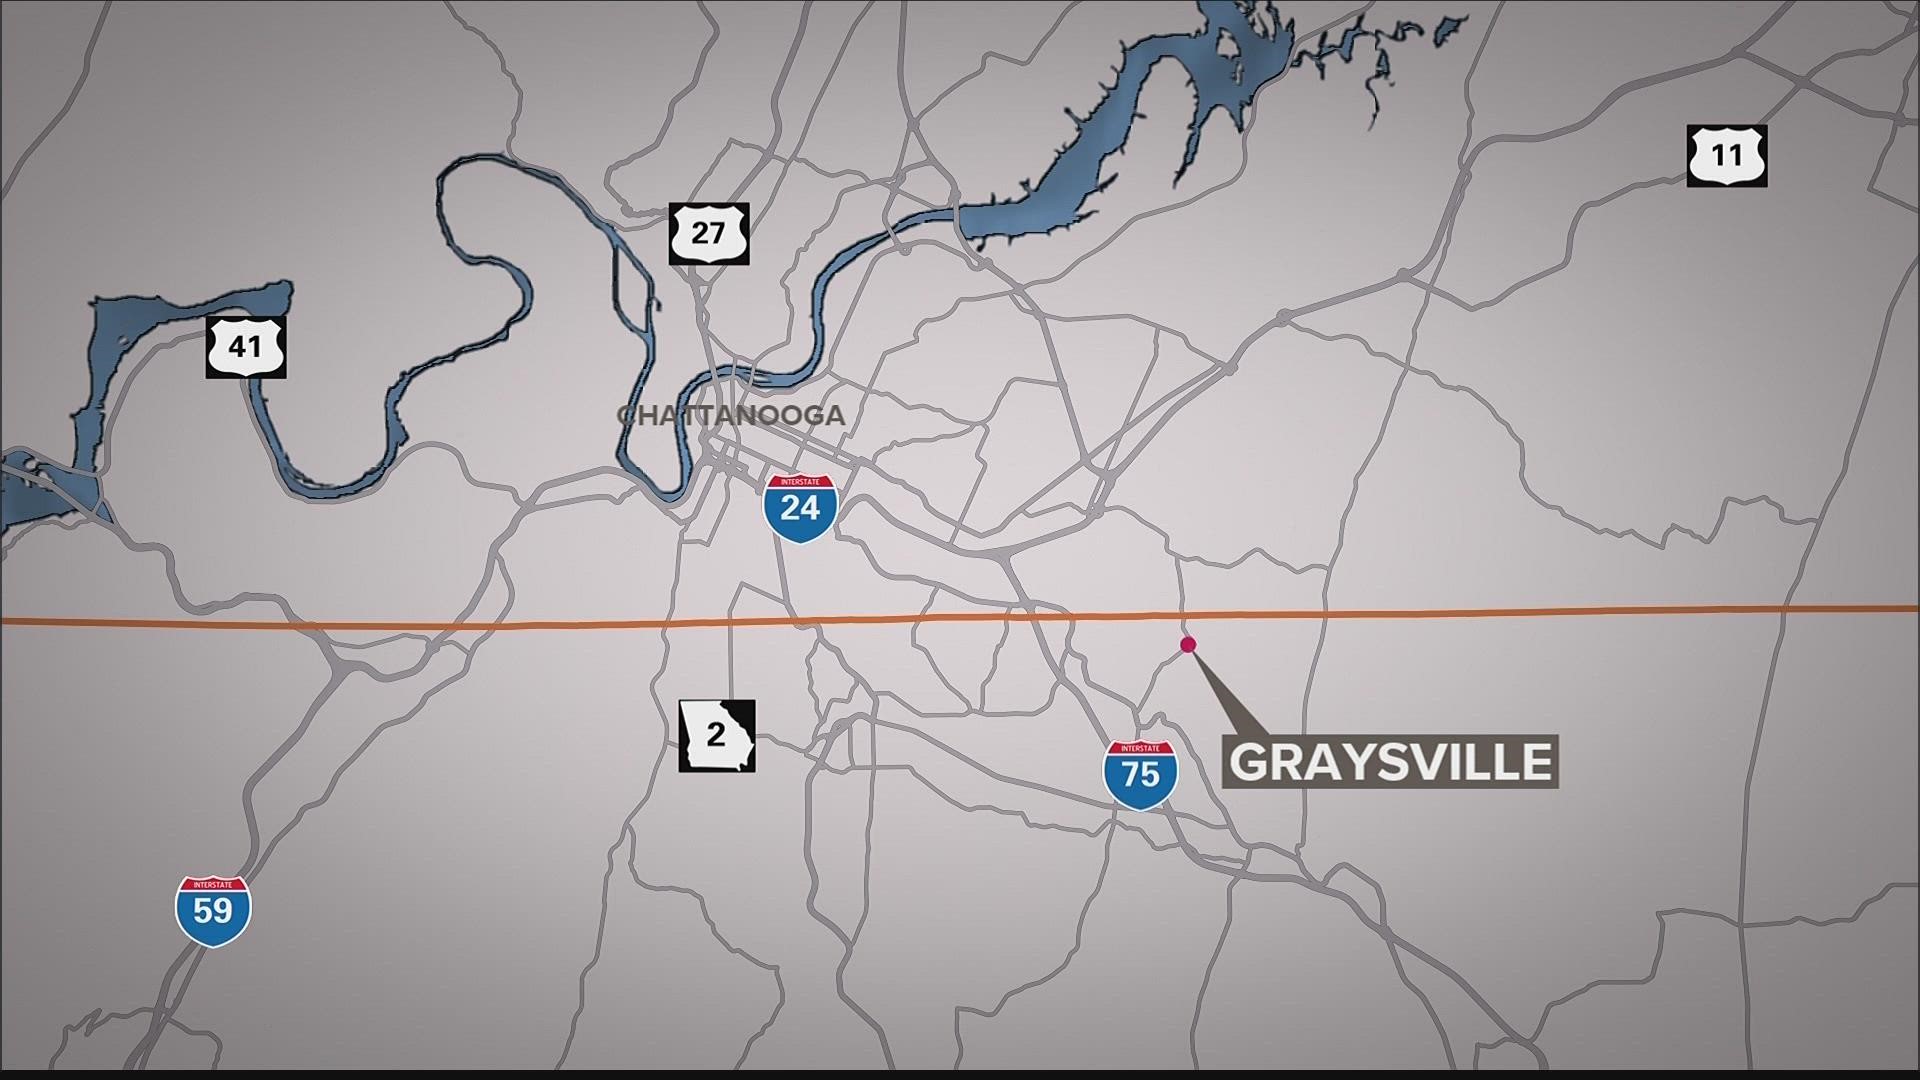 The body was found near a canoe launch in Catoosa County near the Georgia-Tennessee state line.